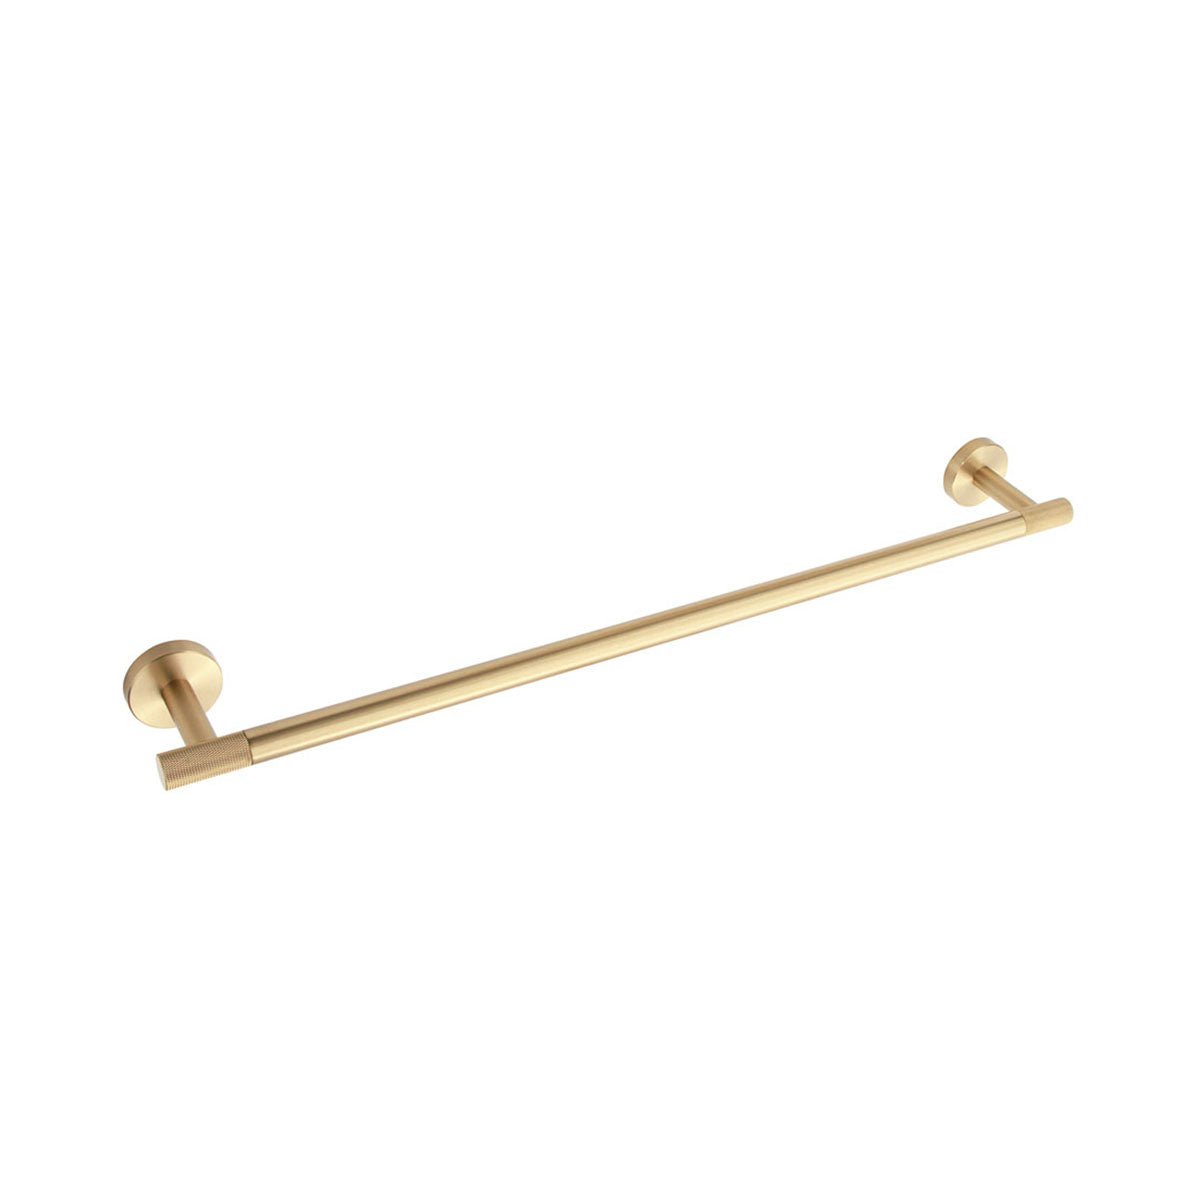 Harbour Knurled Towel Rail 600mm Brushed Brass